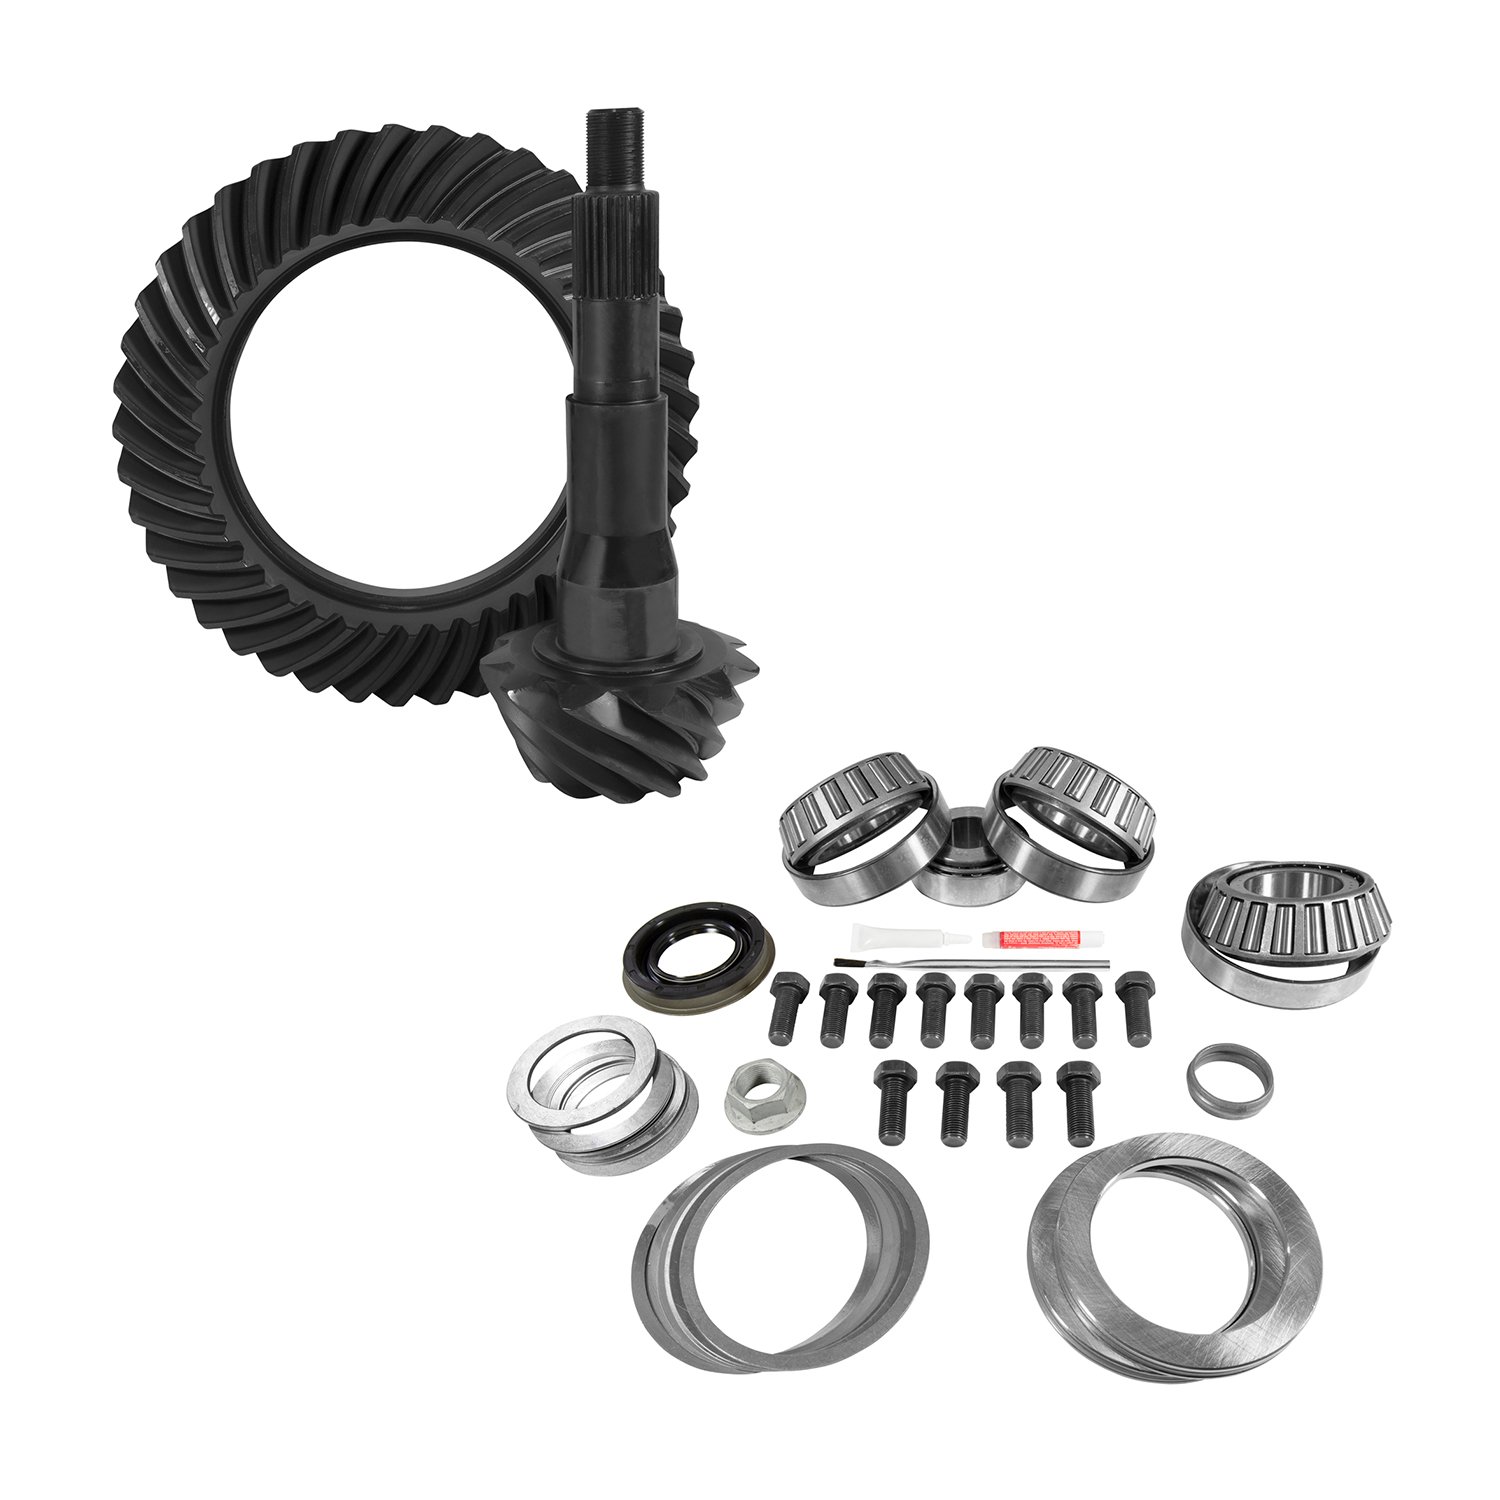 USA Standard 10846 Ring & Pinion And Install Kit, 10.5 in. Ford, 4.30, Rear